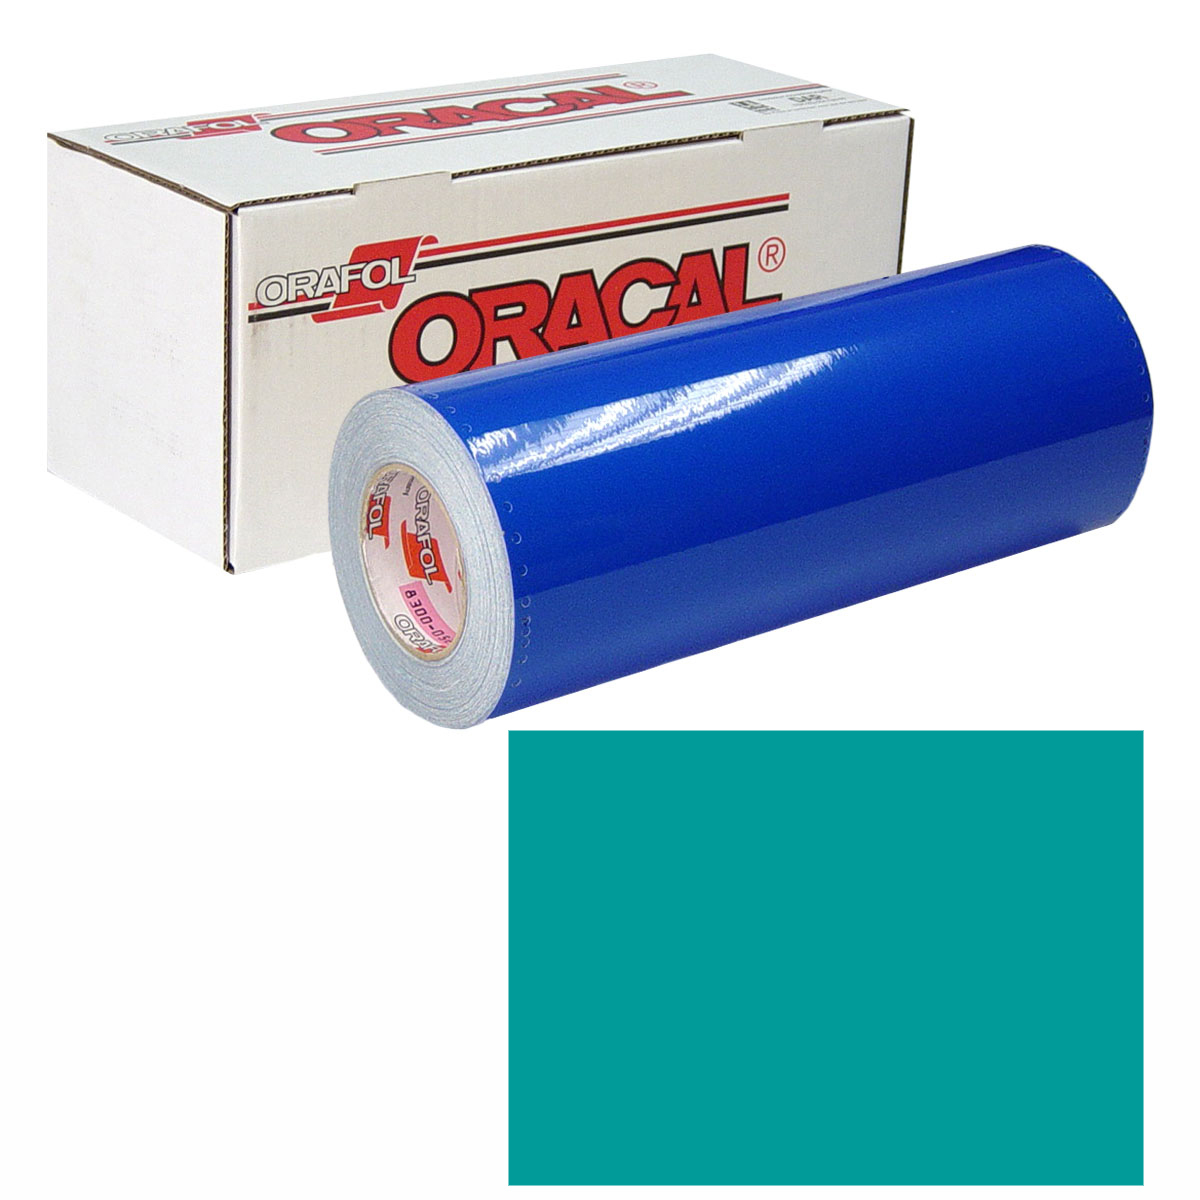 ORACAL 631 Unp 24in X 10yd 054 Turquoise